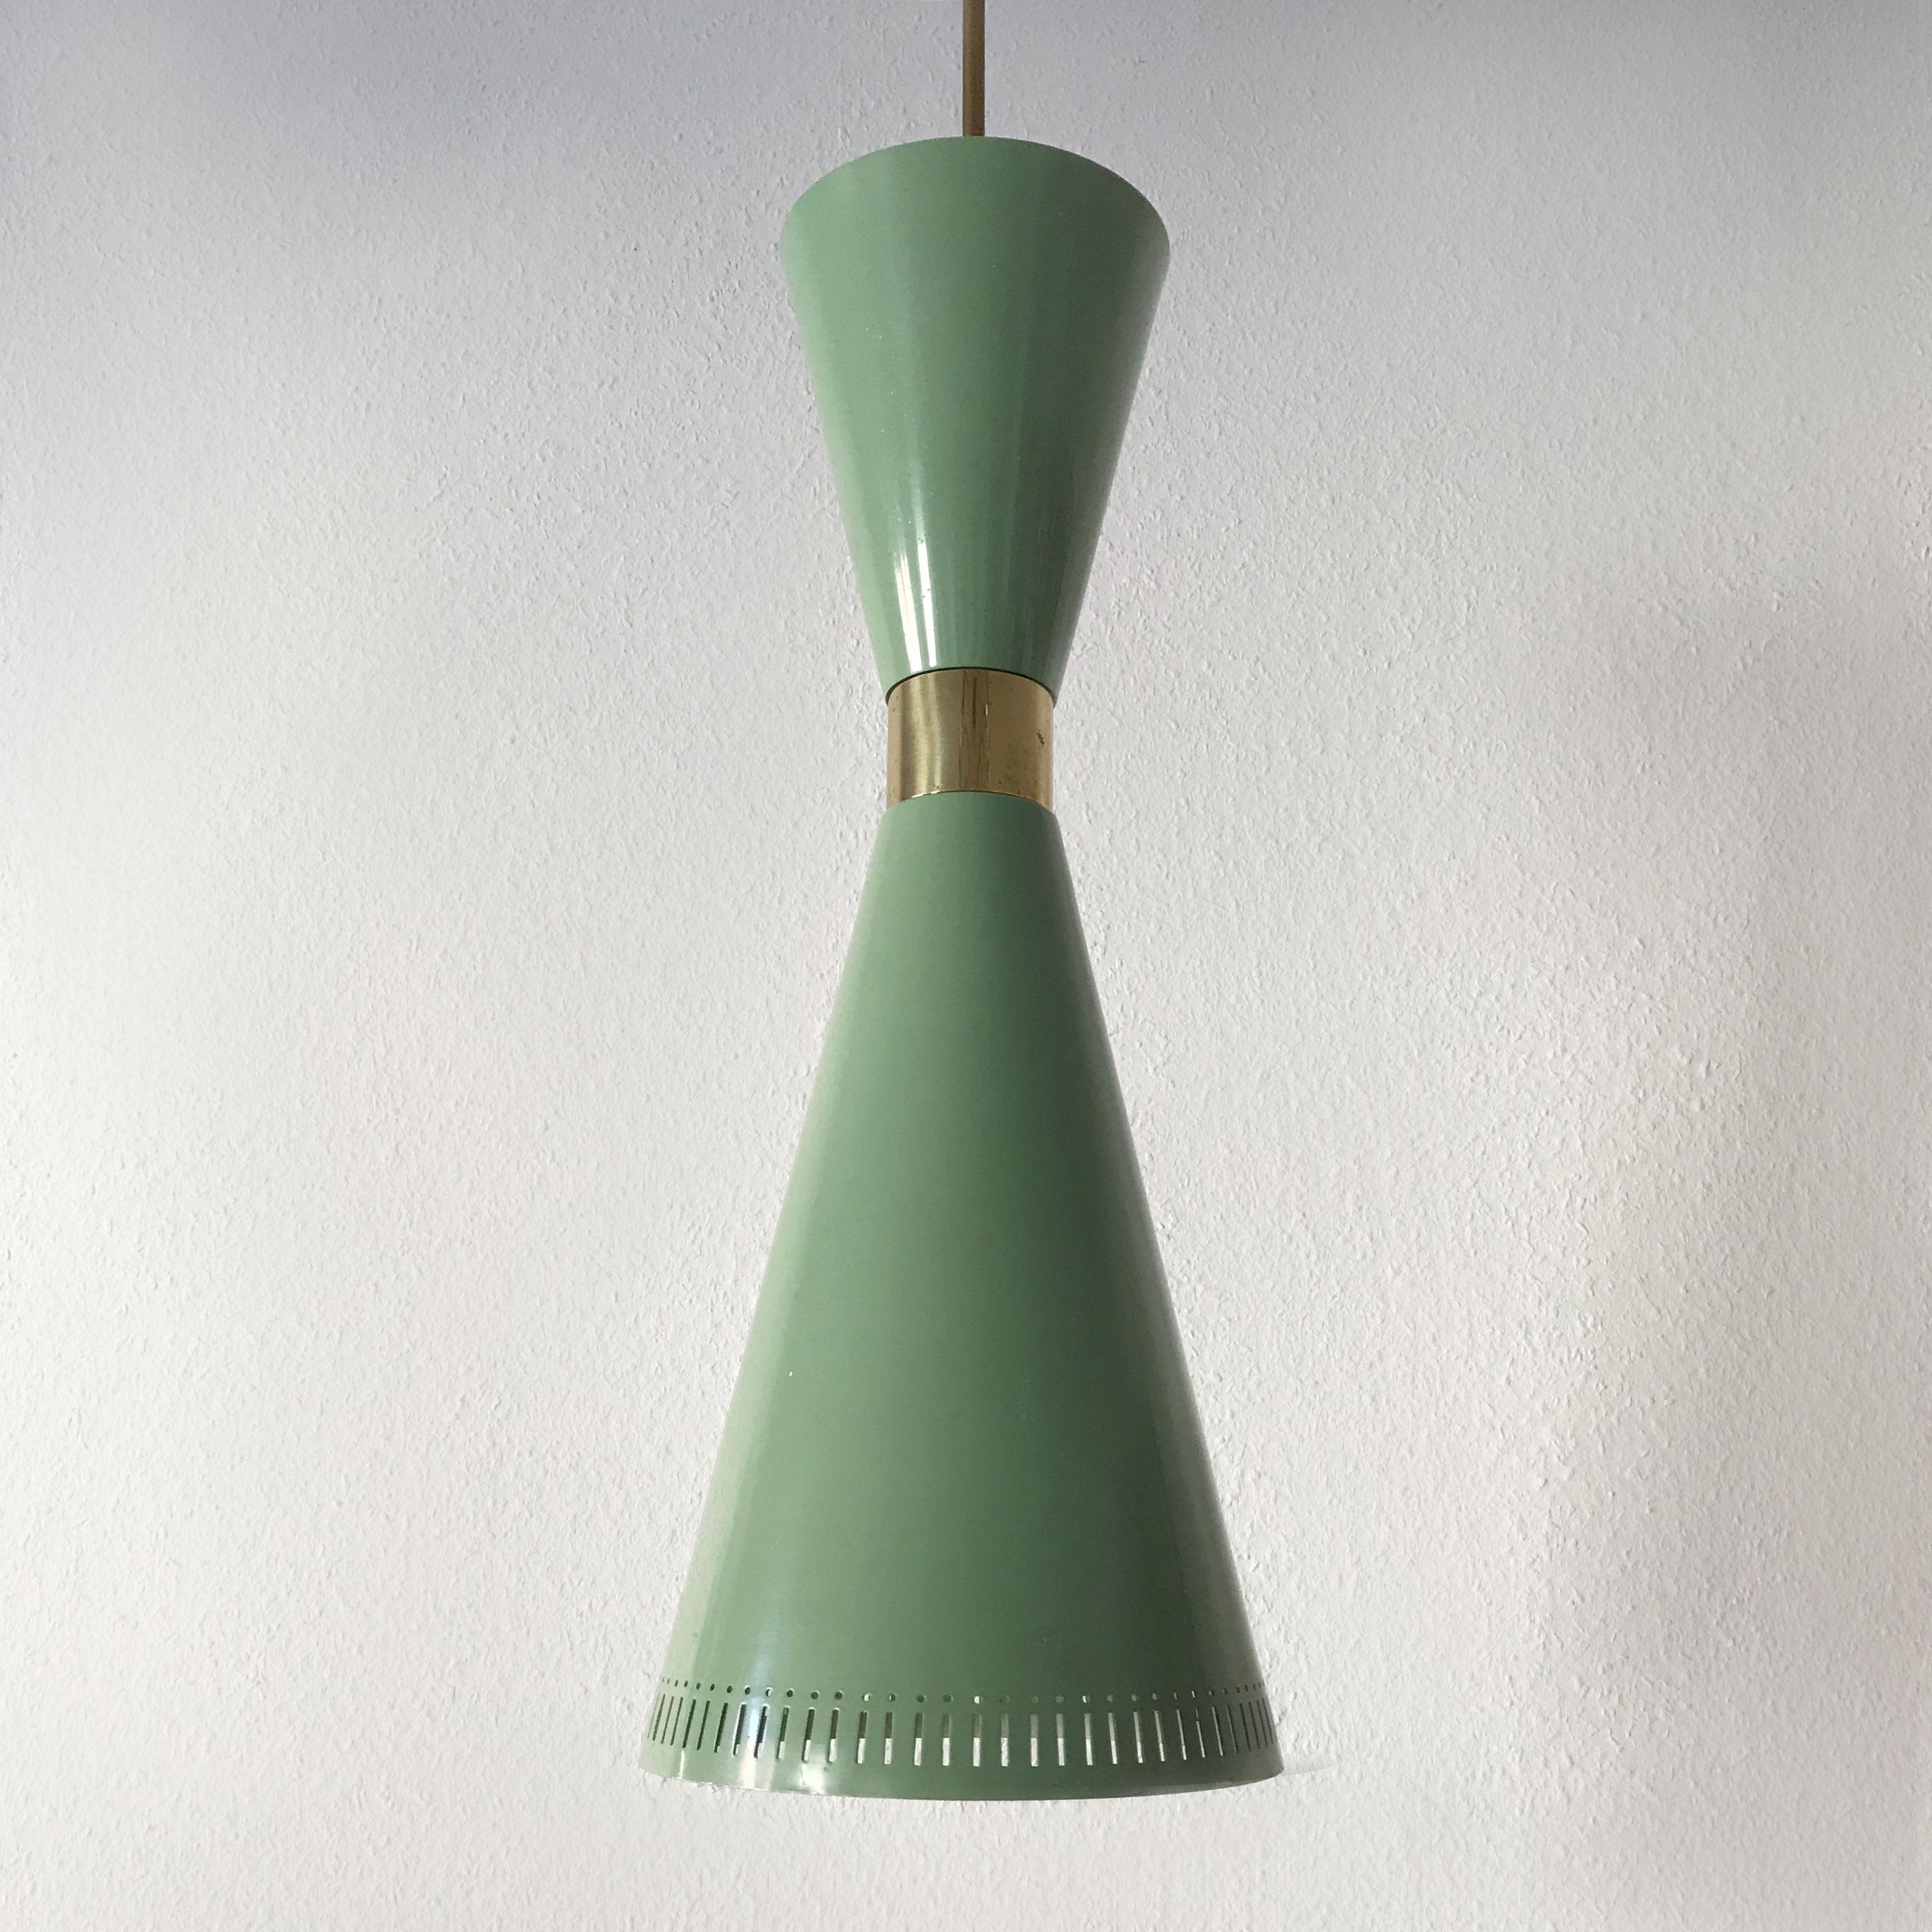 Exceptional Mid-Century Modern Large Diabolo Pendant Lamp by BAG Turgi, 1950s 3